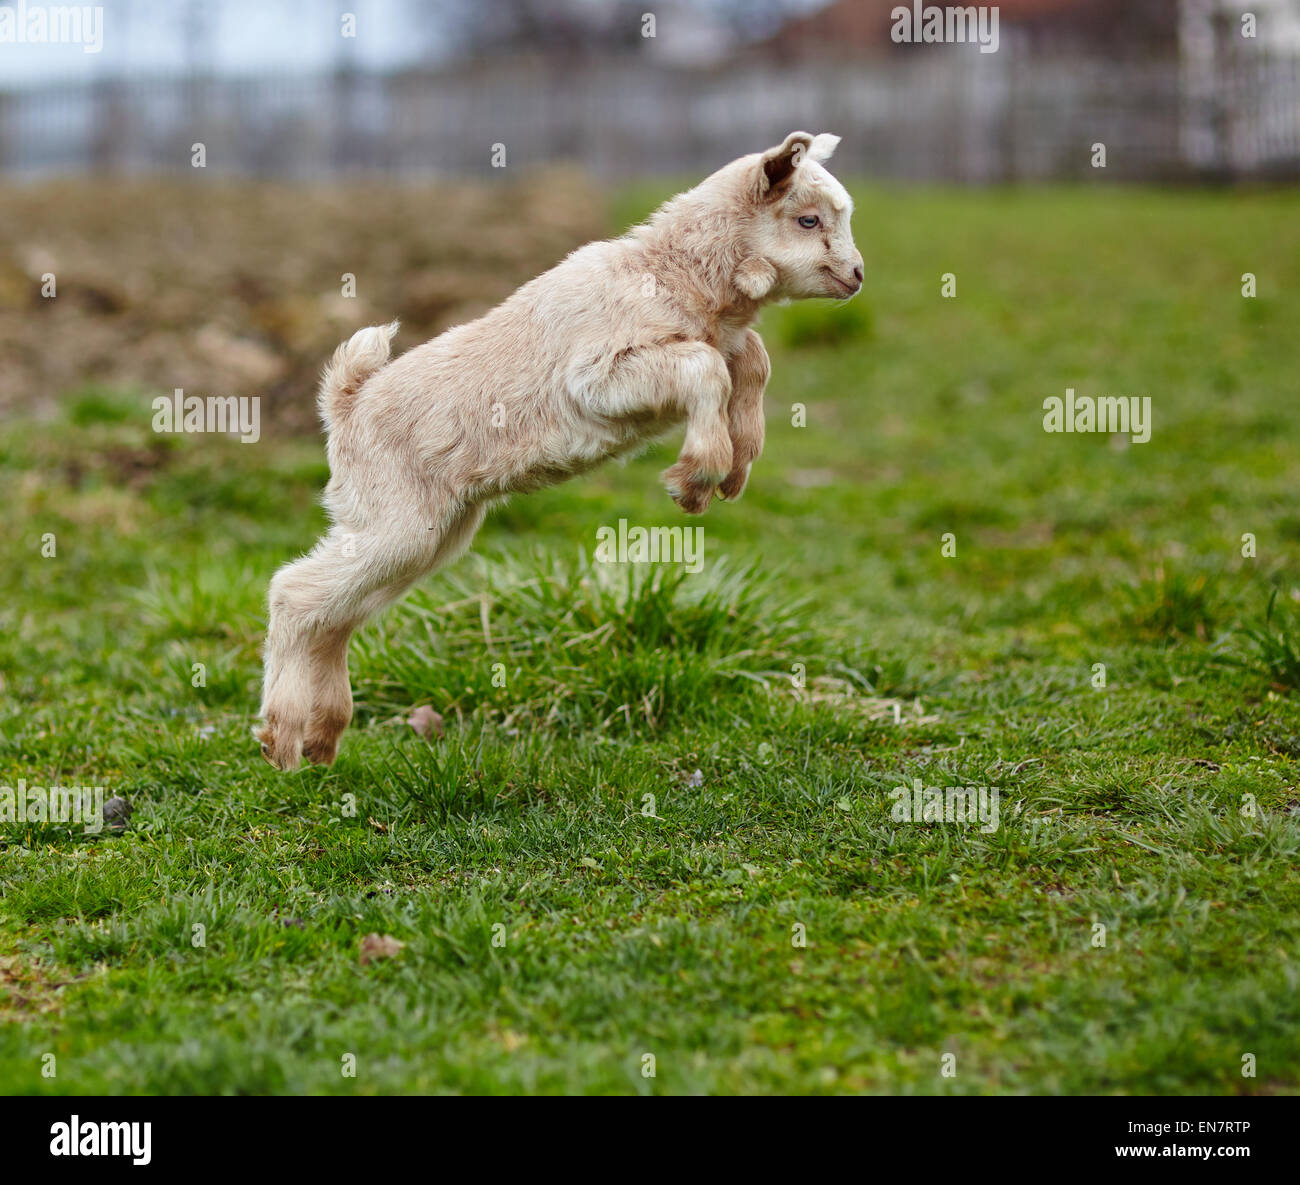 Adorable baby goat jumping around on a pasture Stock Photo